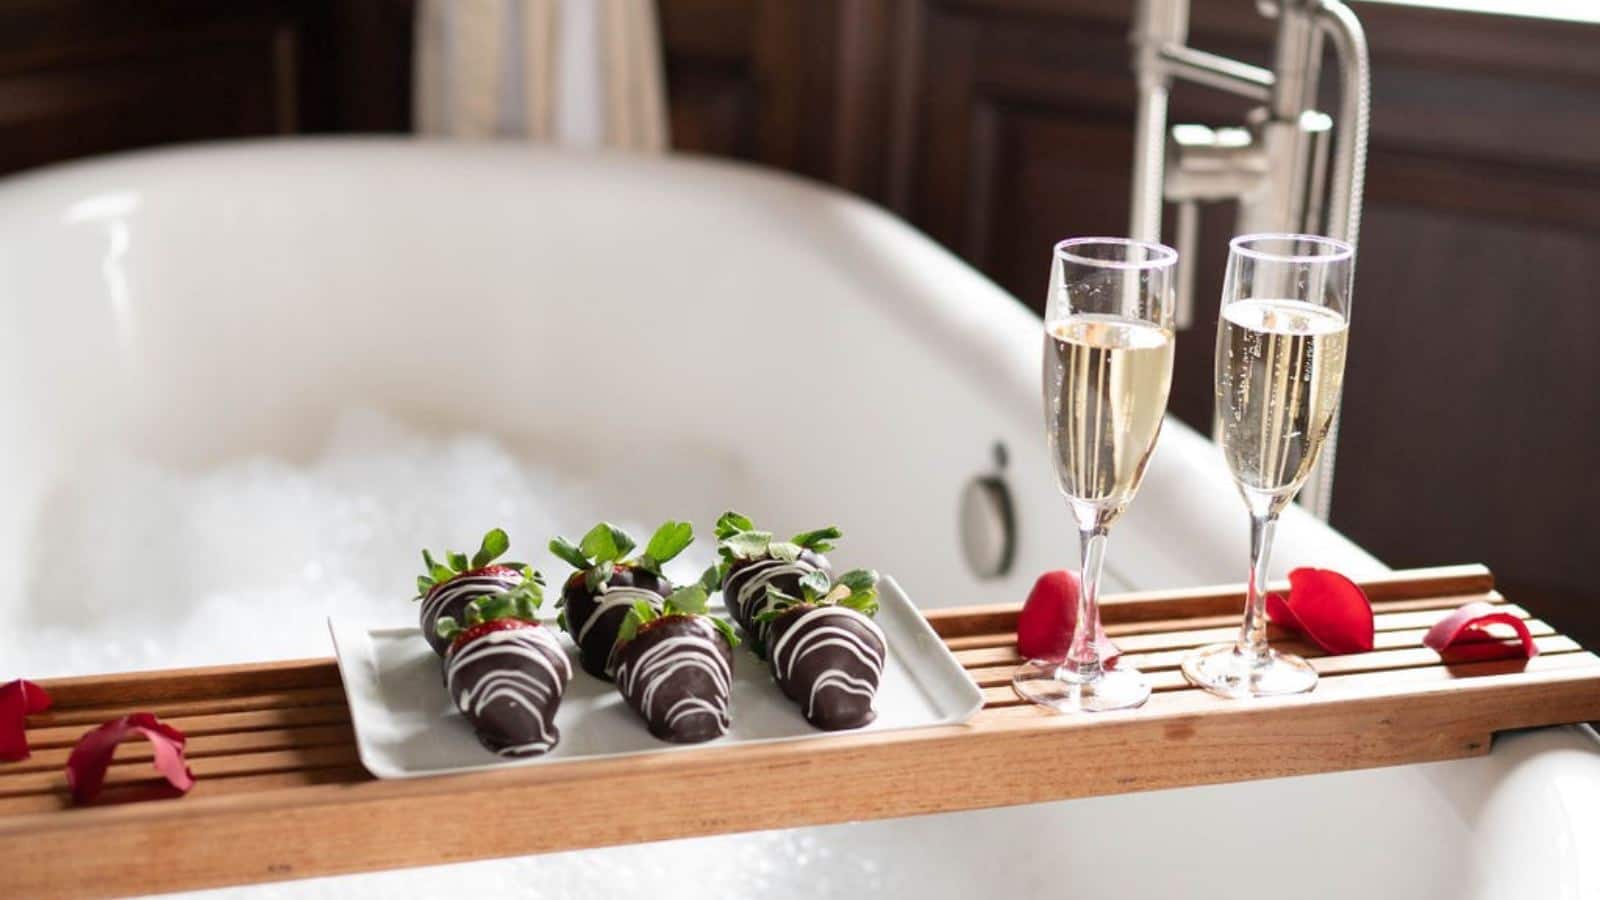 Close up view of small wooden tray across white claw foot tub with chocolate covered strawberries and glasses of Champagne